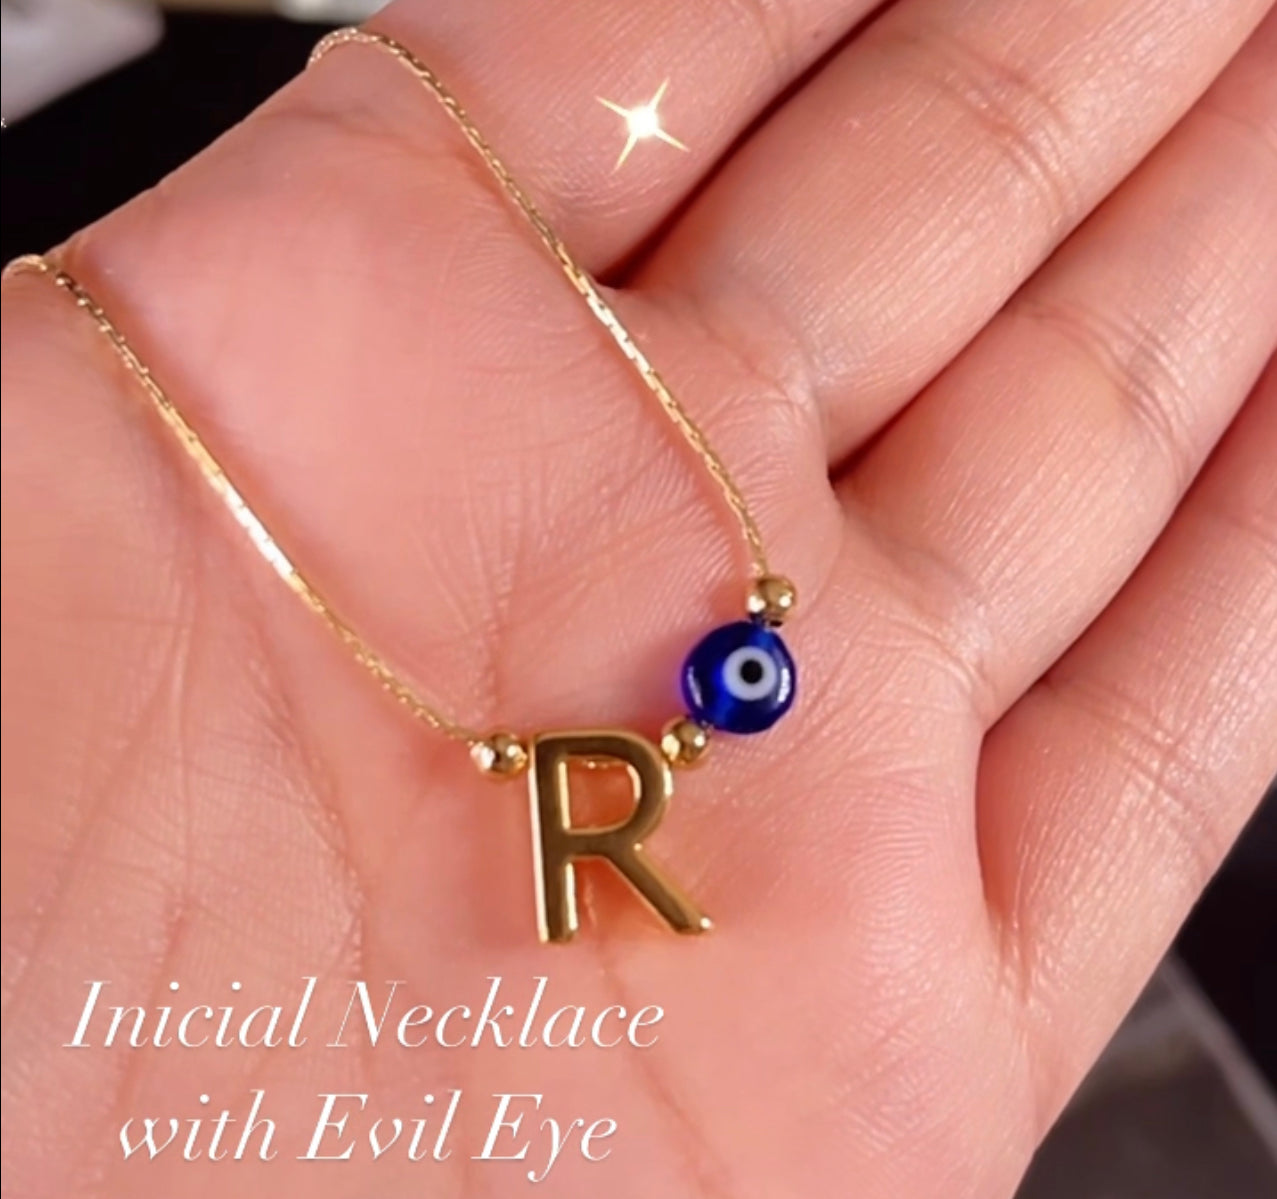 Inicial Necklace with Evil Eye